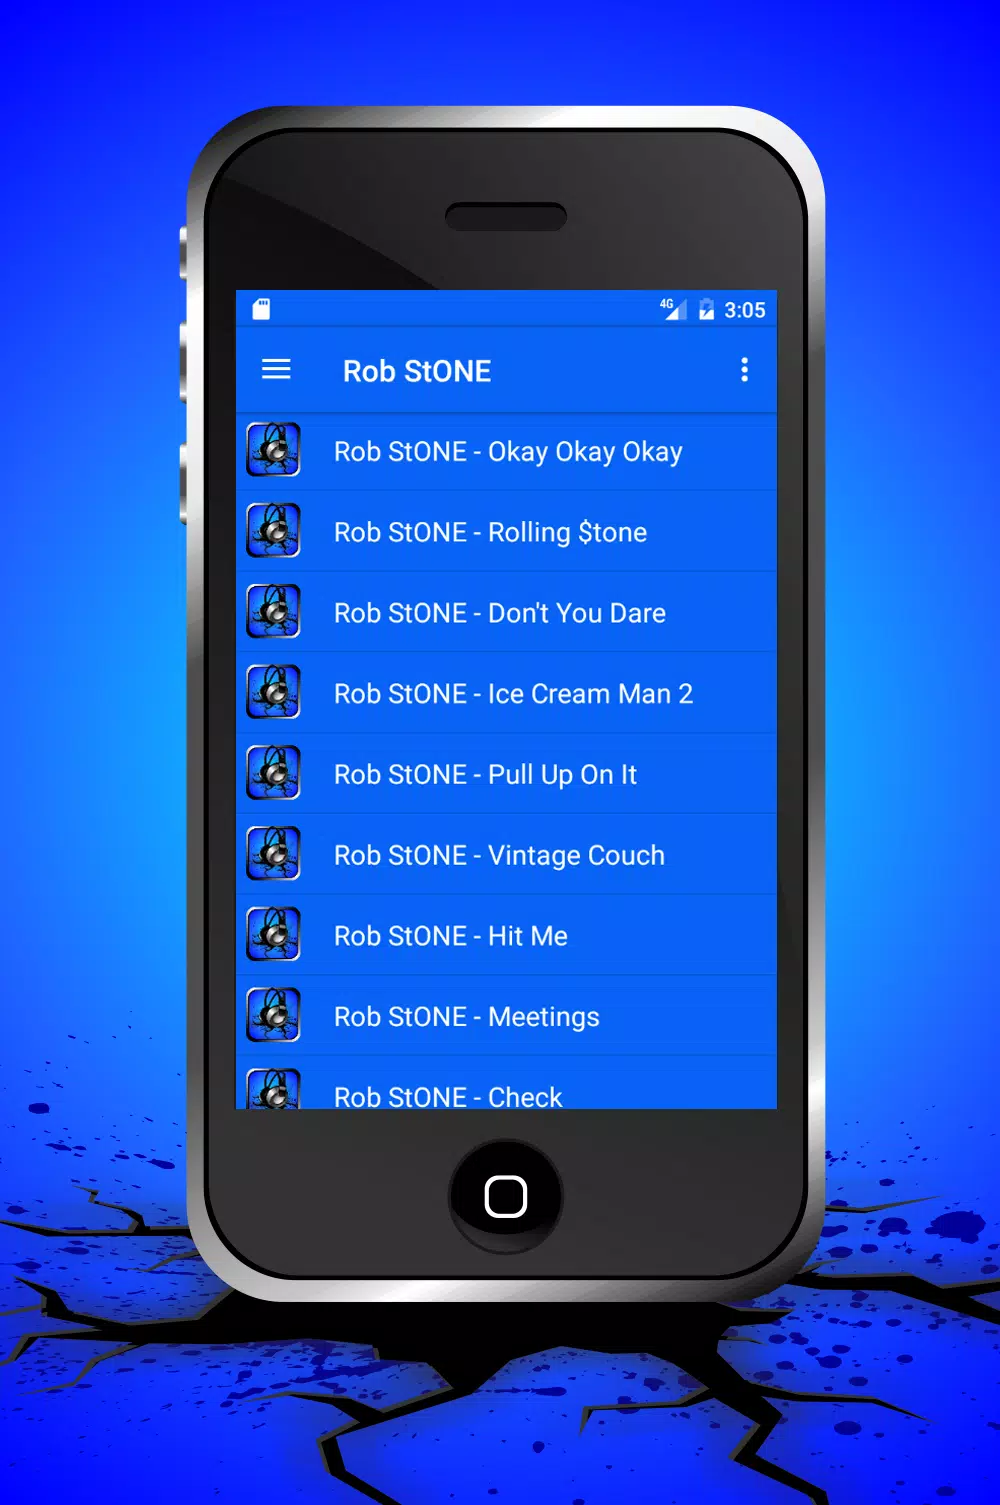 Chill Bill Rob StONE APK for Android Download